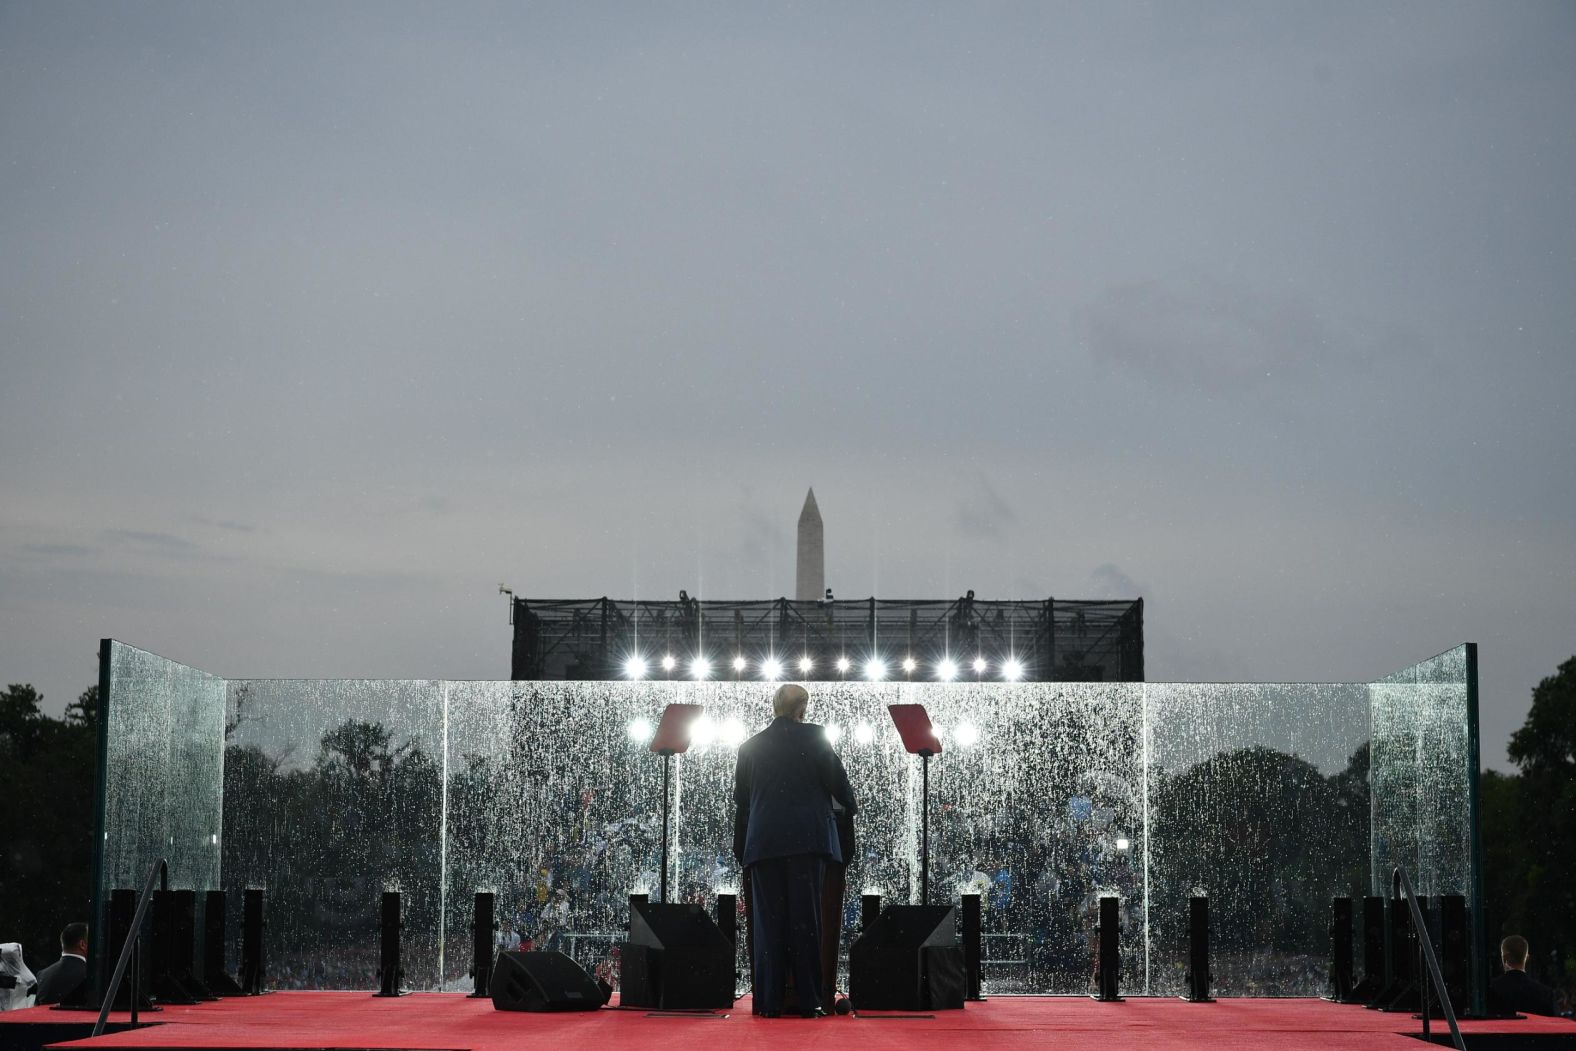 The President delivered his speech behind bulletproof glass. He struck a patriotic tone in <a href="index.php?page=&url=https%3A%2F%2Fwww.cnn.com%2Fpolitics%2Flive-news%2Ftrump-washington-dc-july-4-2019%2Fh_a70dff7abf7bd57b33e7f57186e8bcb1" target="_blank">a largely apolitical speech</a> running approximately 45 minutes, including the flyovers.